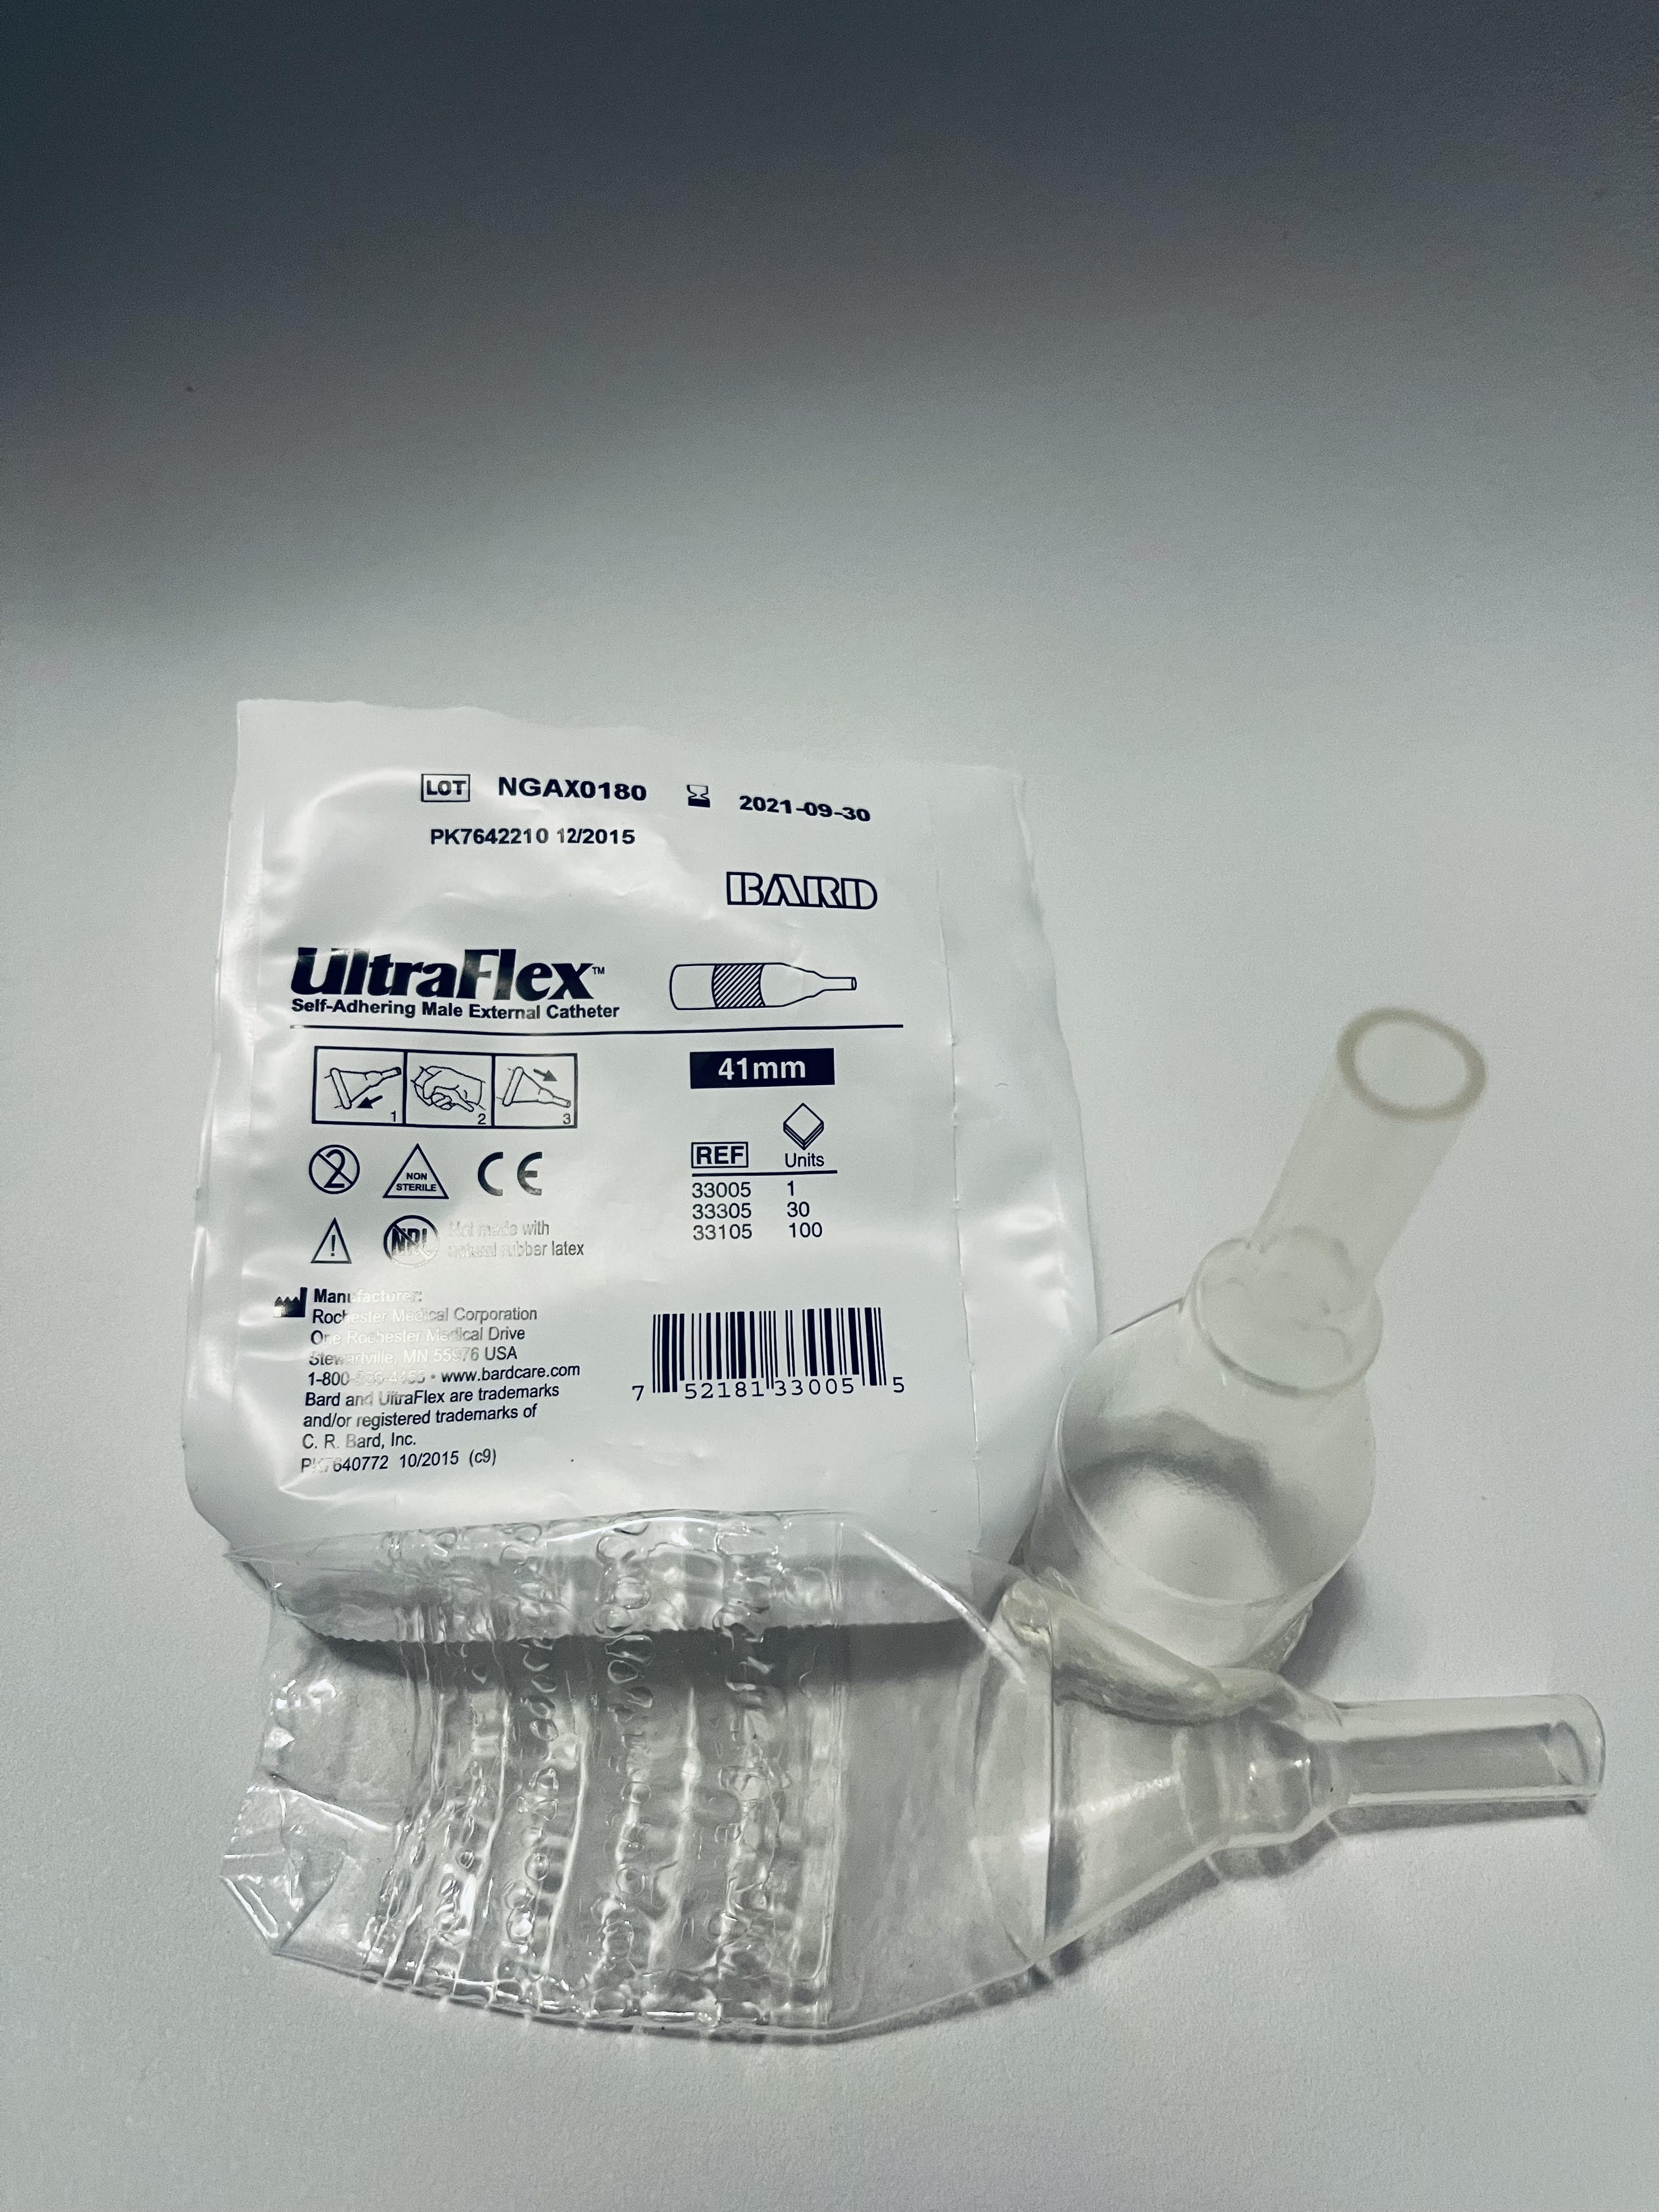 Urinary Kits 1-Week Kits 1-Week Urinary Incontinence  Kit (41mm UltraFlex) by Veteran Medical Supplies online store selling catheters, drainage bags, urinary kits centrally located in Kansas City Missouri shipping to the entire United States